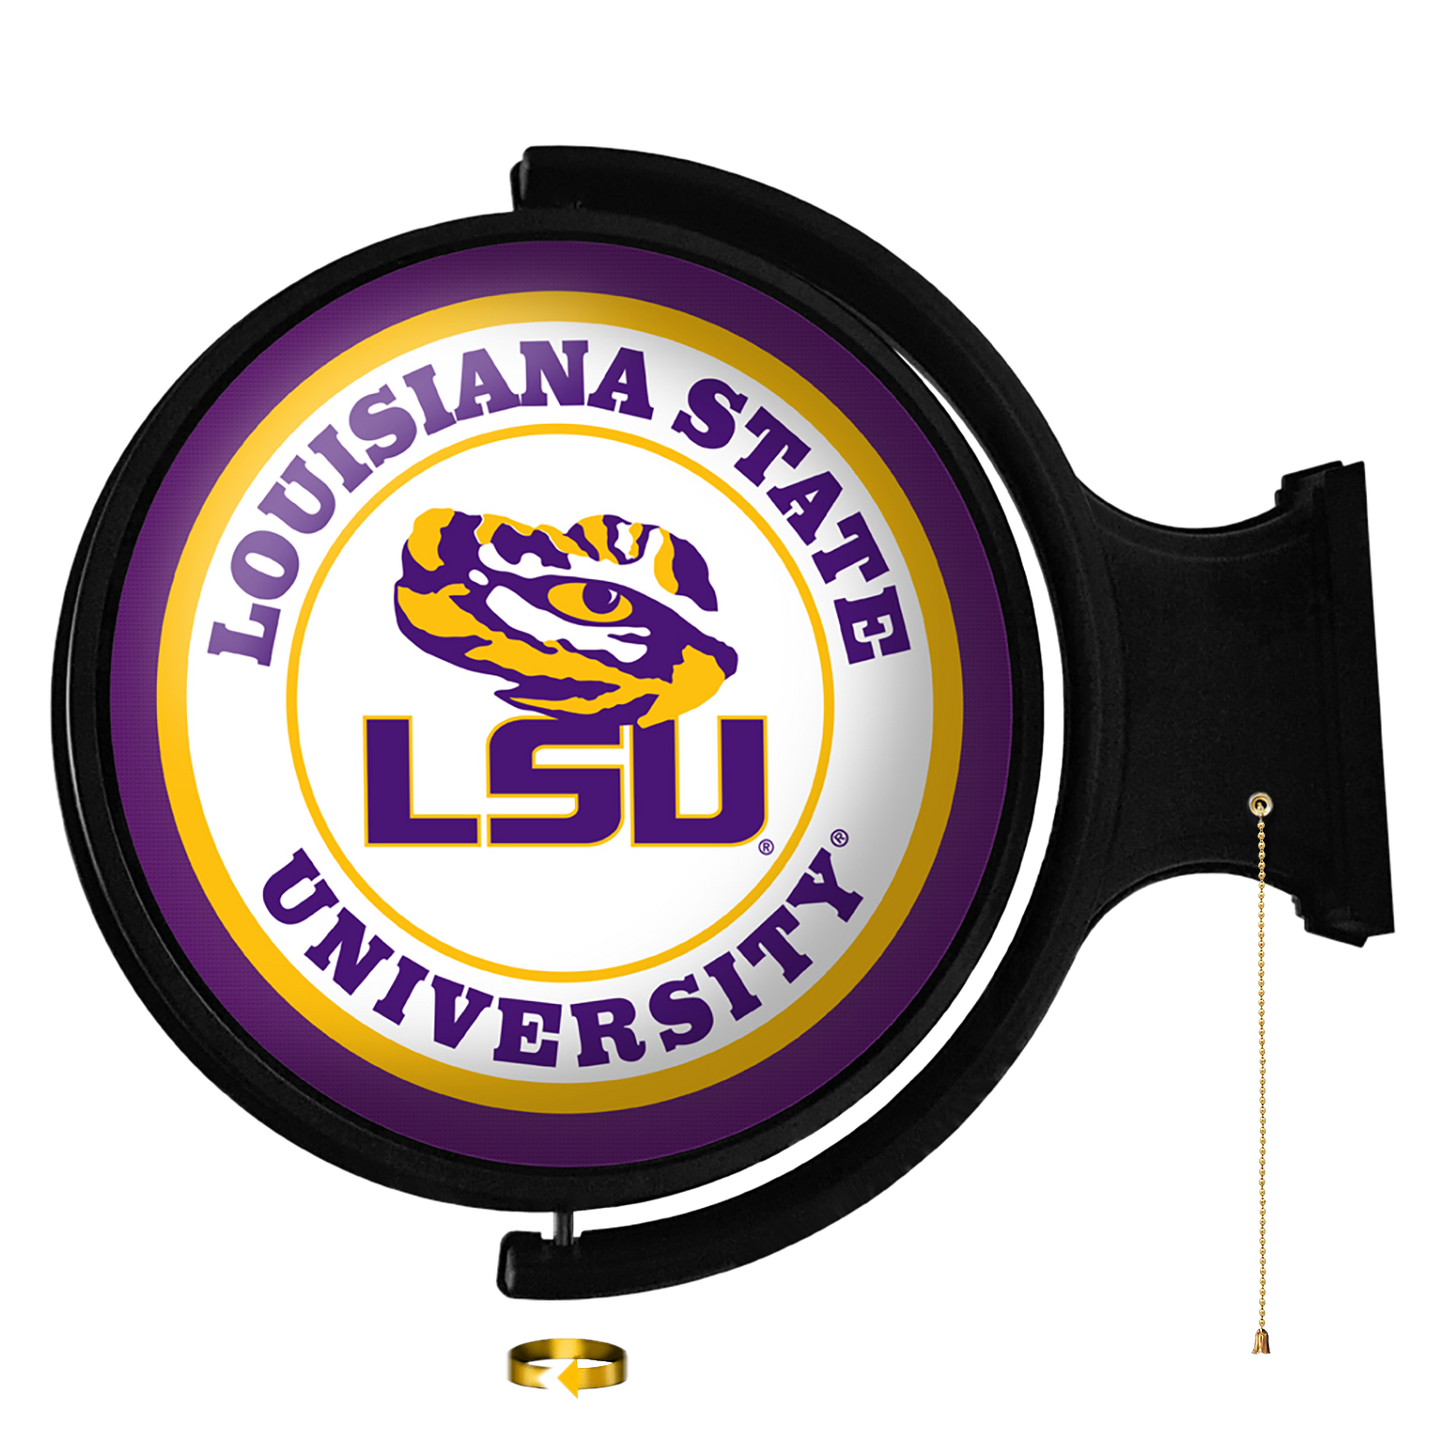 LSU Tigers Round Rotating Wall Sign